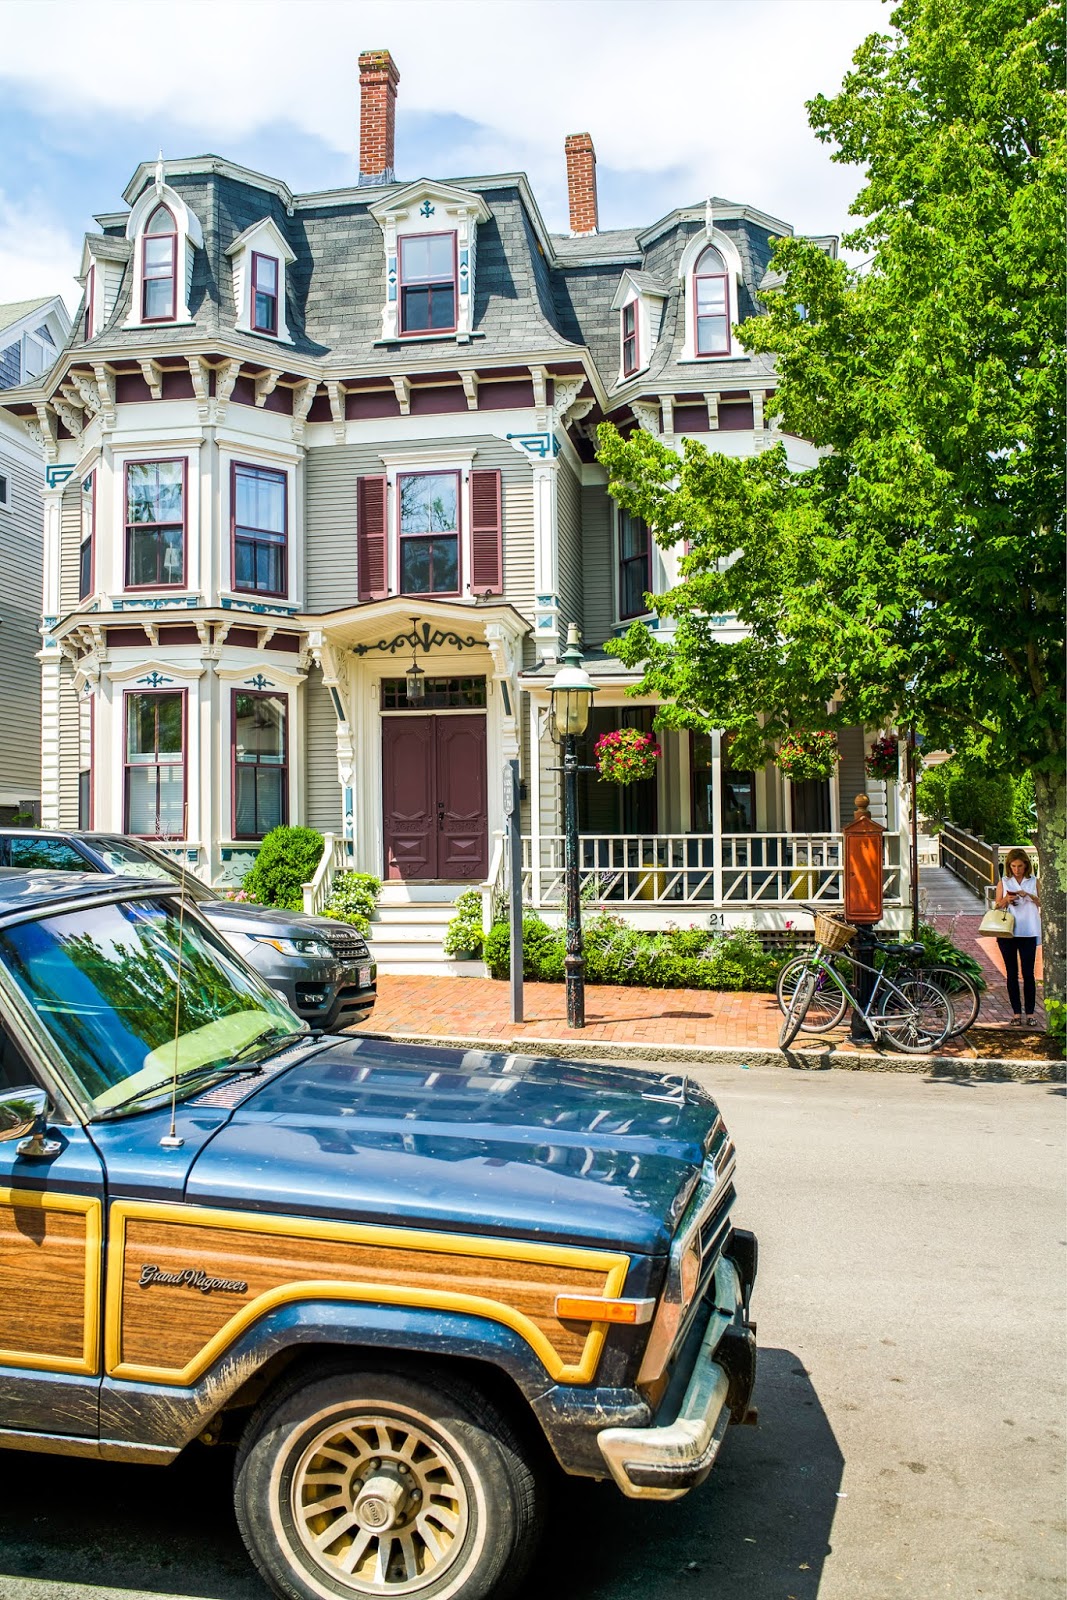 Favorite Nantucket Hotel: 21 Broad featured by popular New York life and style blogger, Covering the Bases